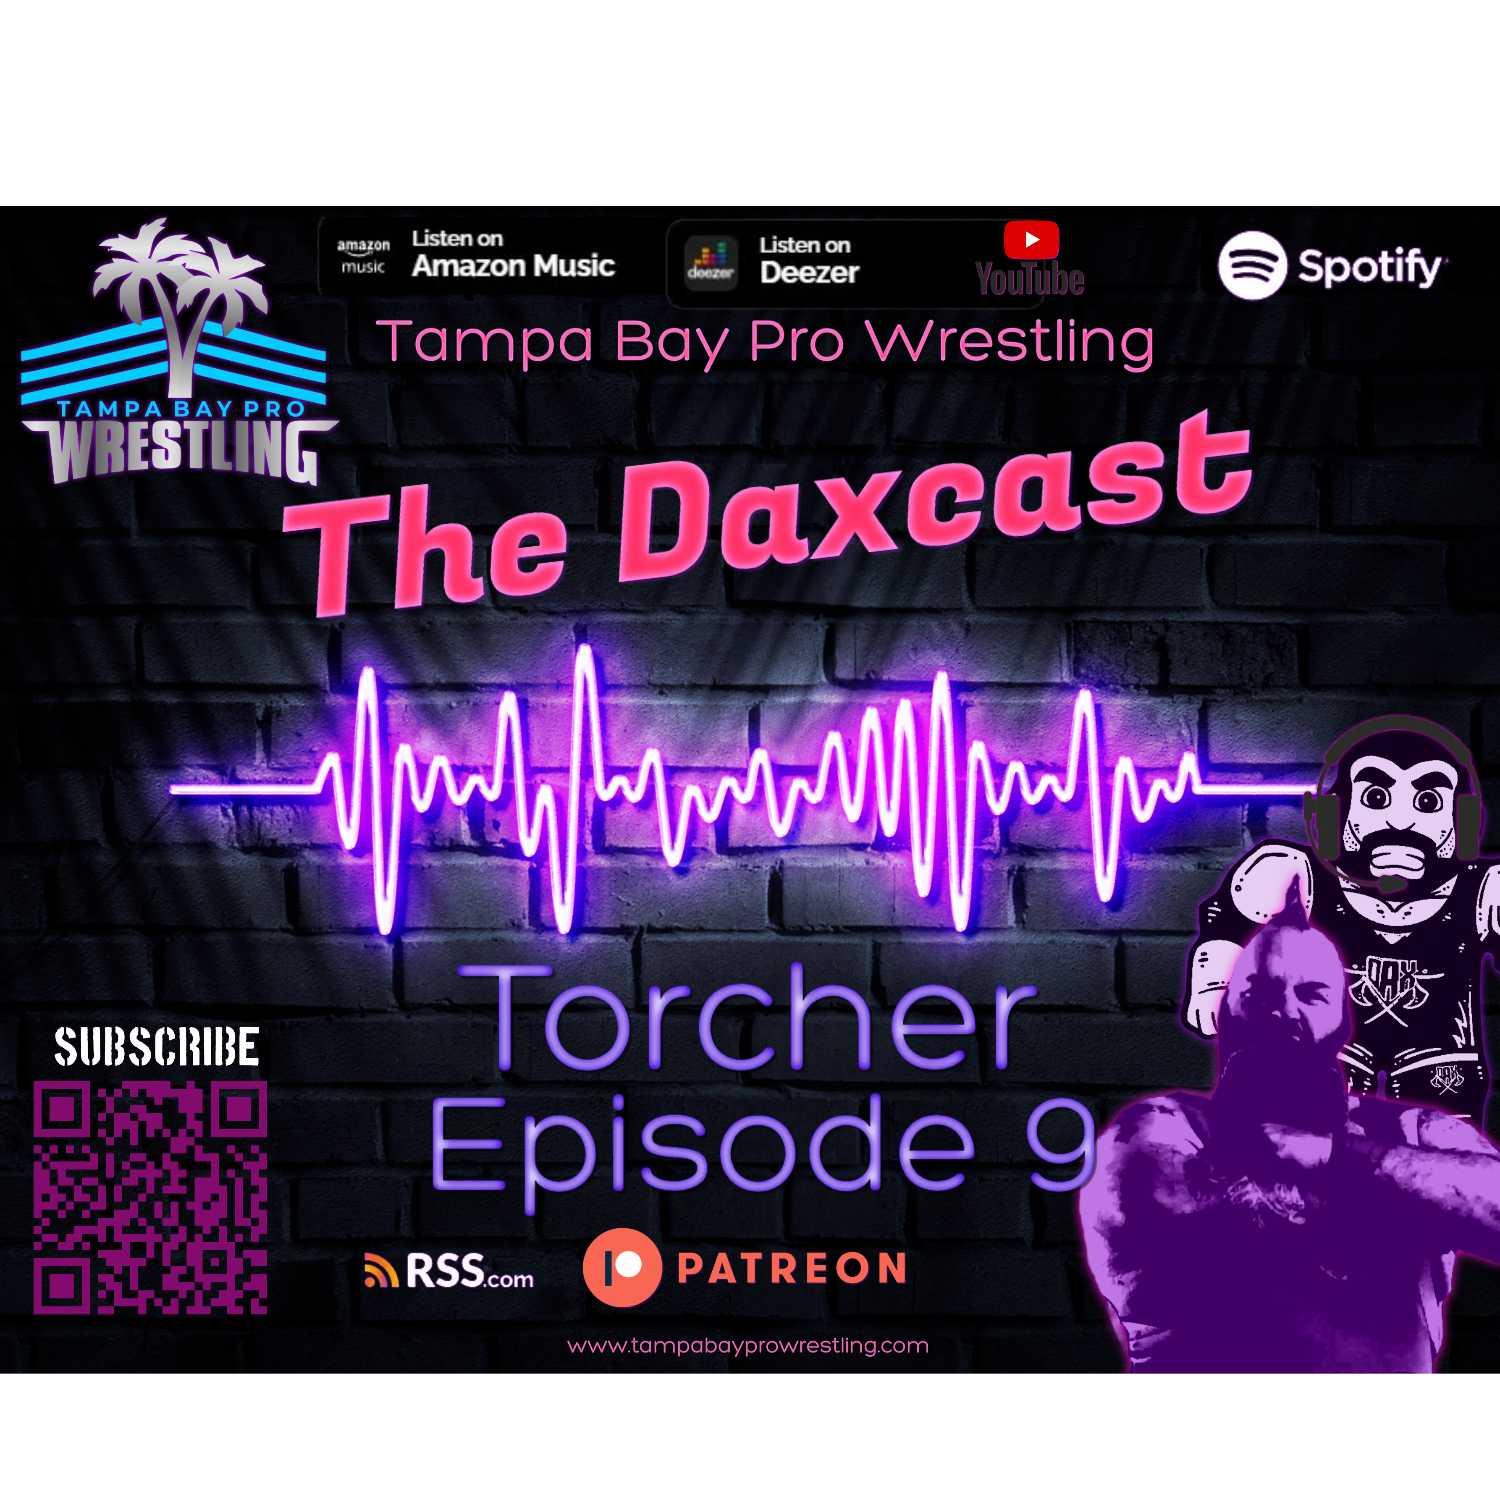 The Daxcast - ep 9 - Torcher